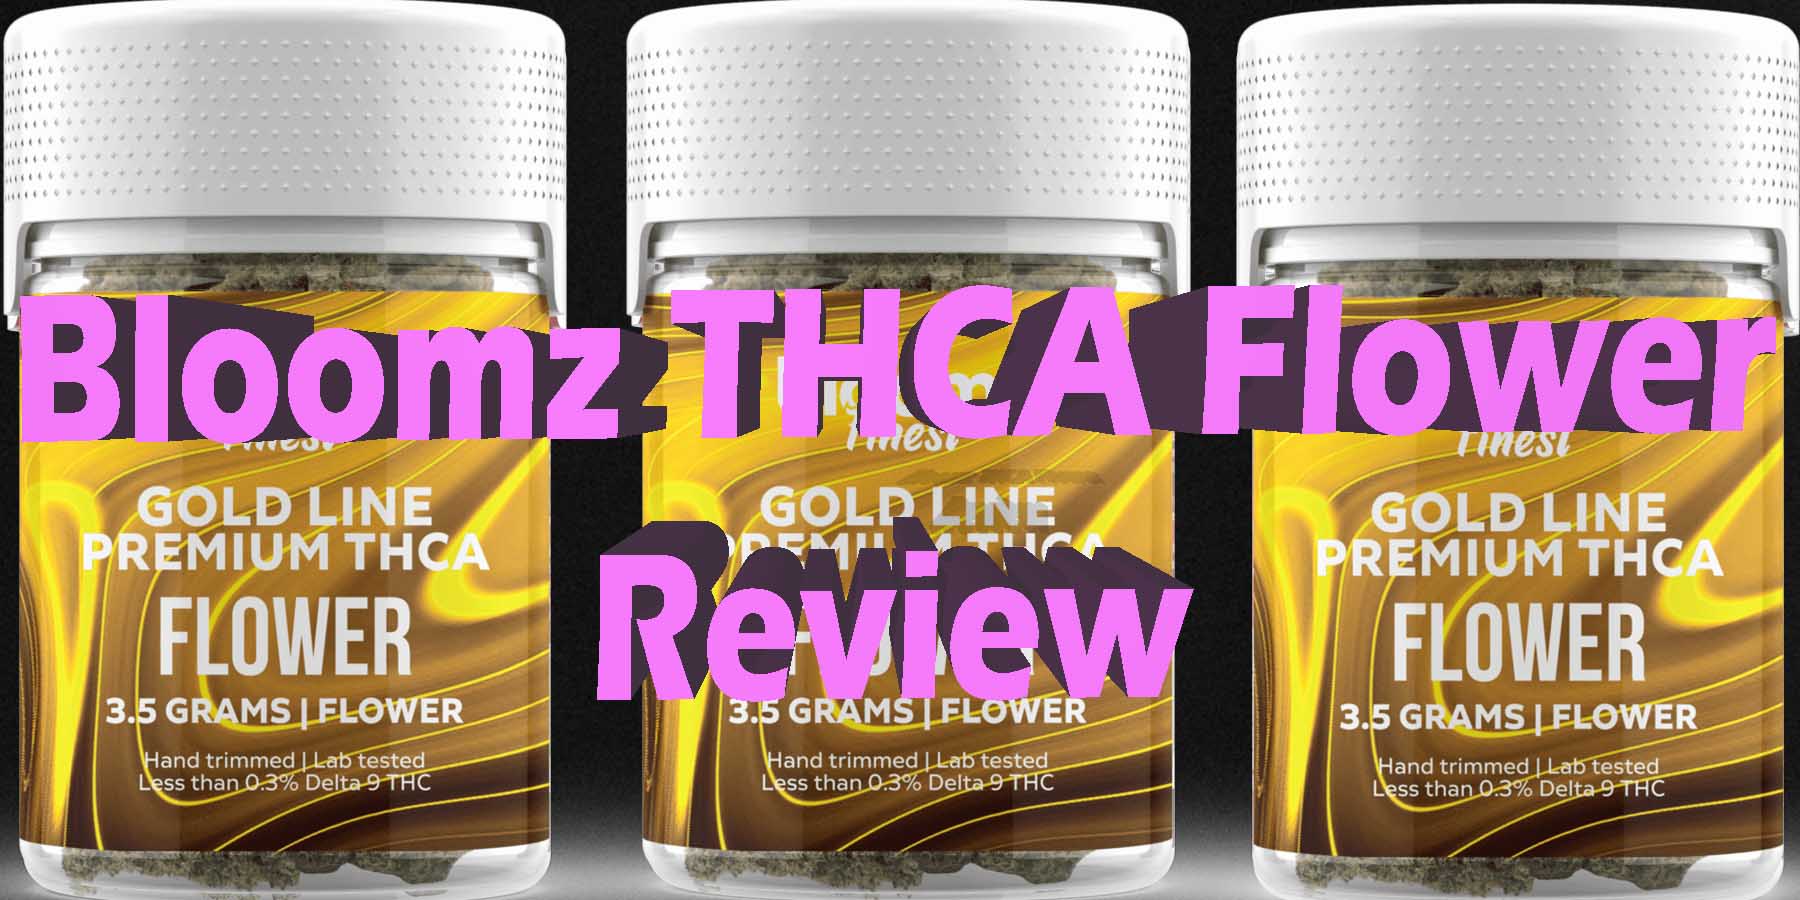 Bloomz THCA Flower Review WhereToGet HowToGetNearMe BestPlace LowestPrice Coupon Discount For Smoking Best High Smoke Shop Online Near Me Strongest Binoid Bloomz